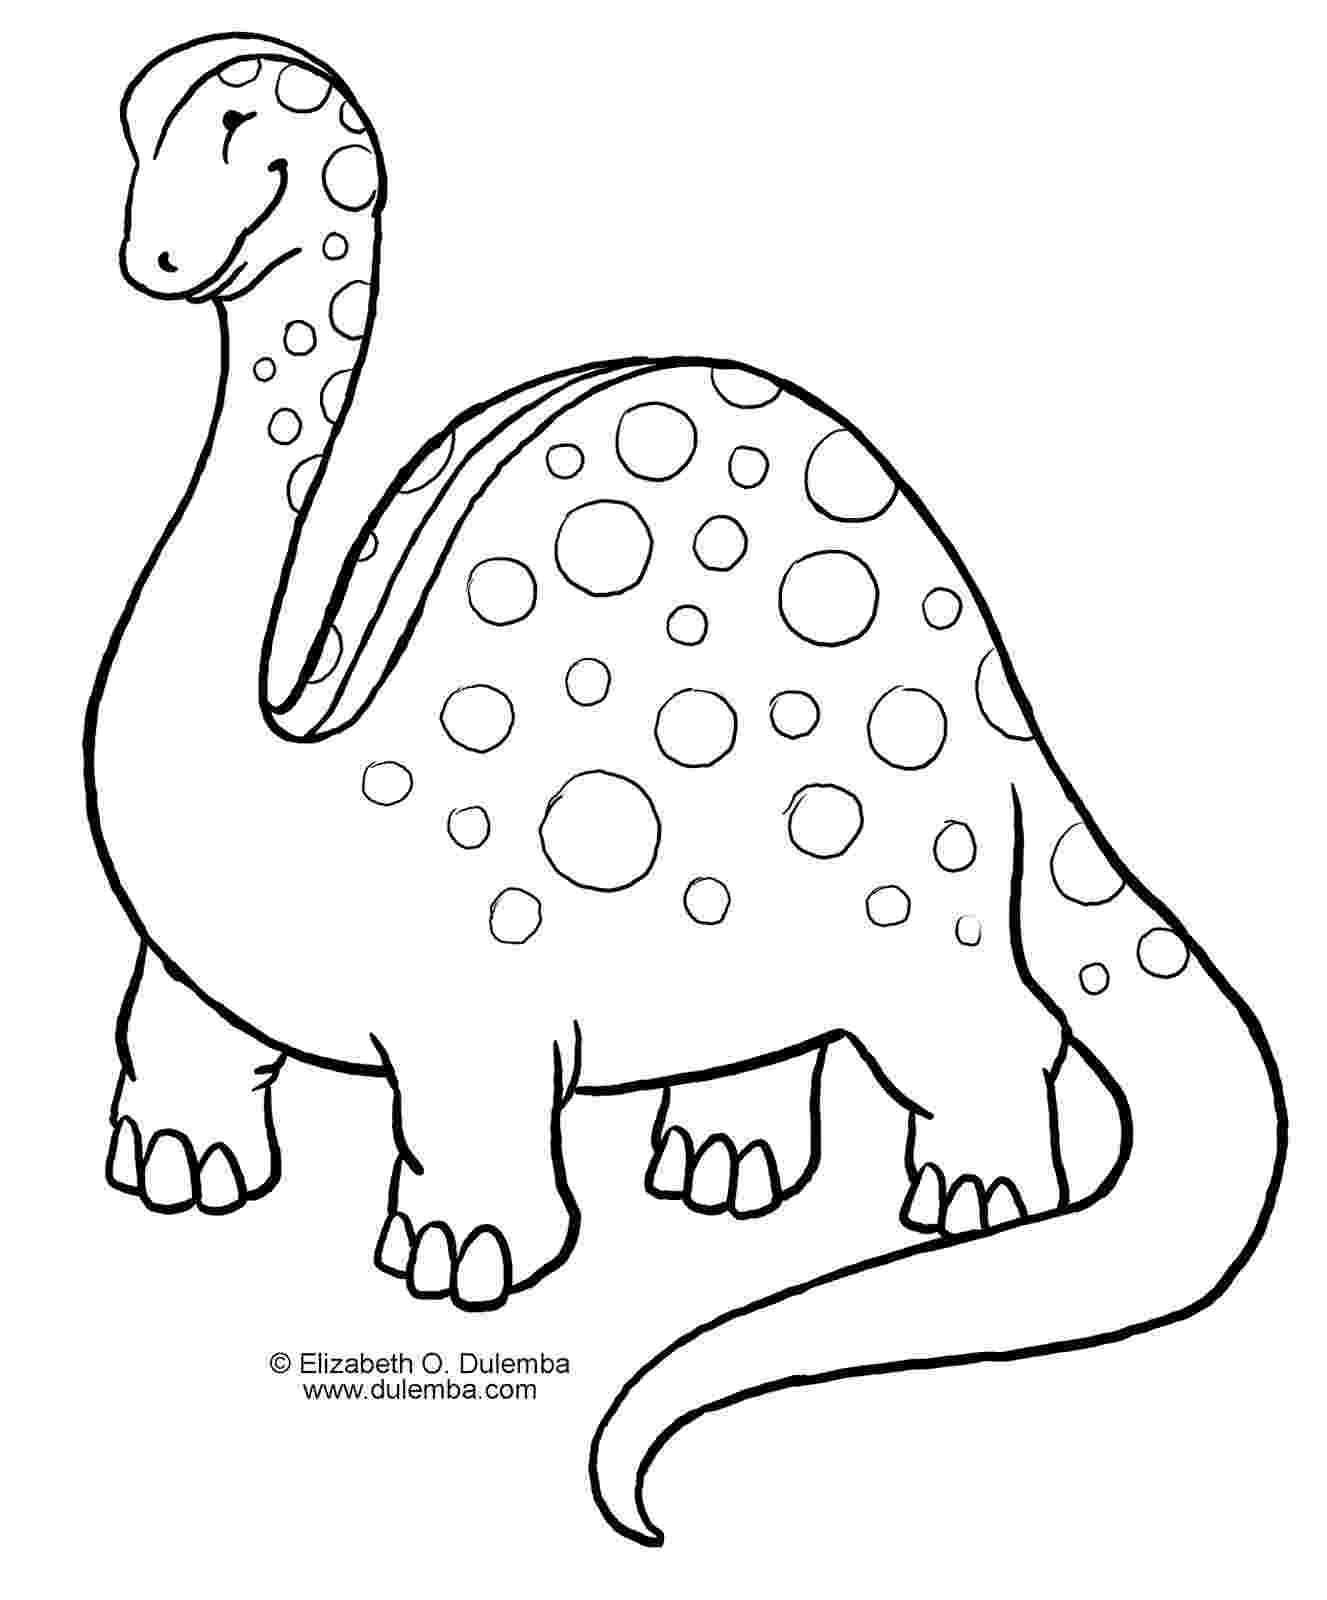 dinosaurs colouring pictures to print dinosaurs coloring pages collection free coloring sheets print colouring dinosaurs to pictures 